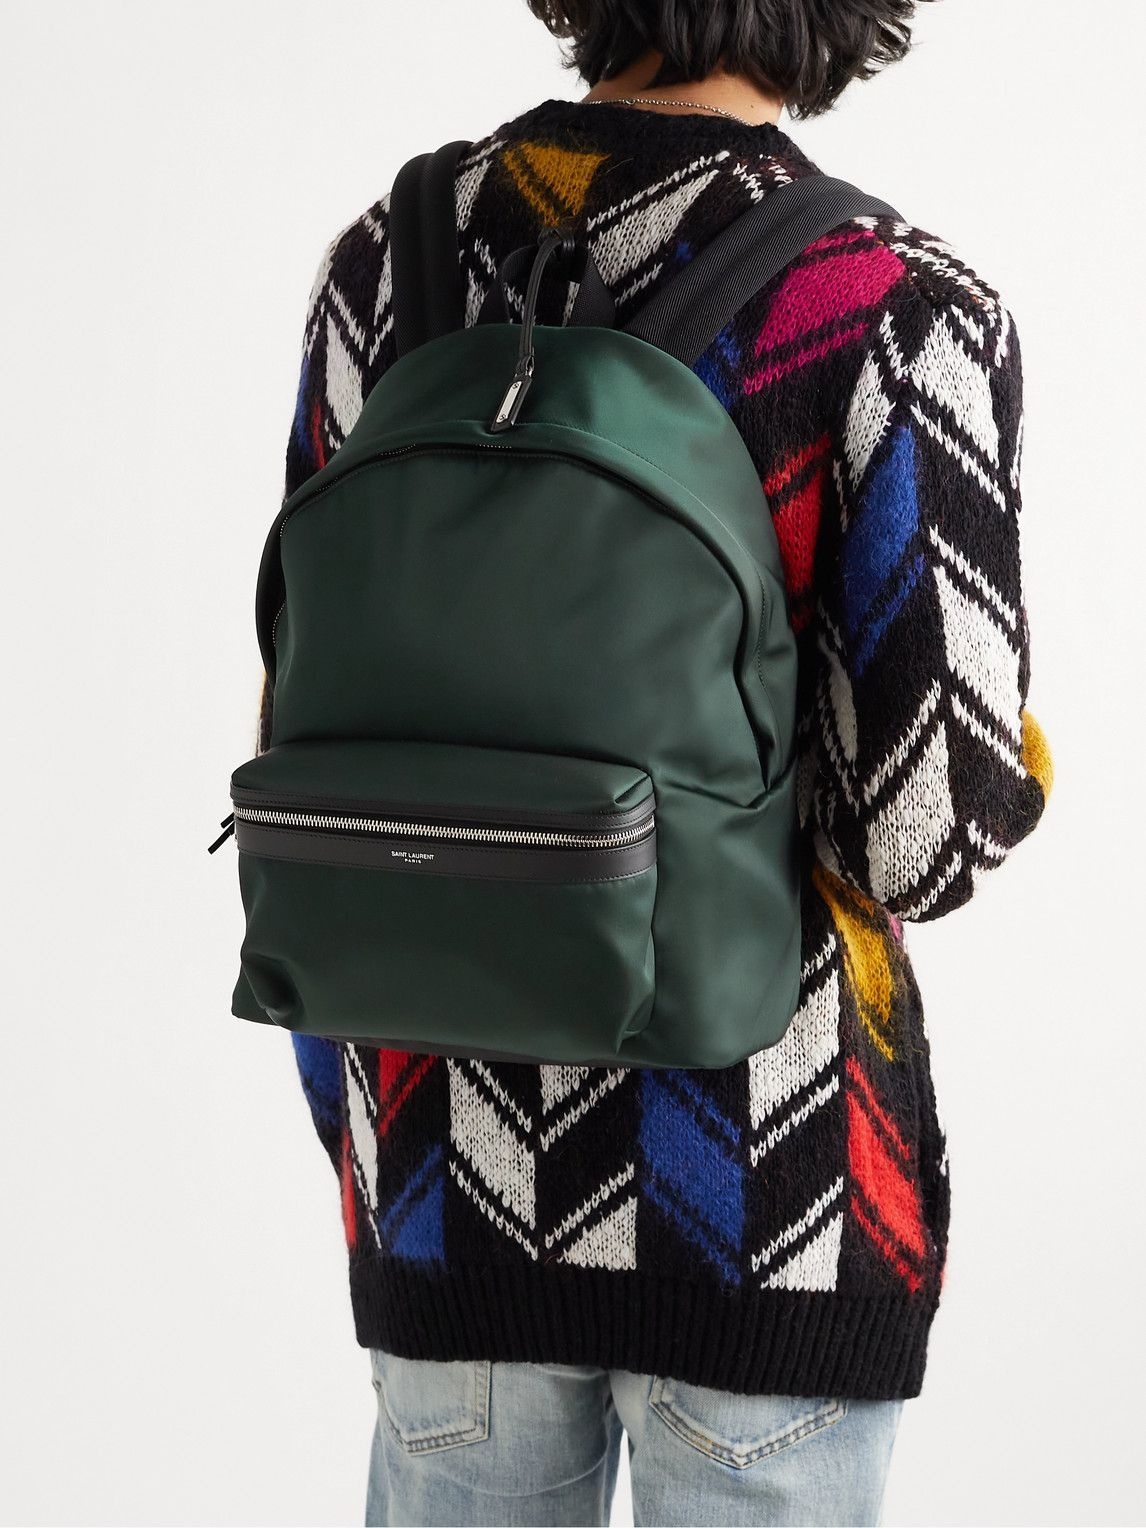 Saint Laurent City Multi-pocket Backpack In Smooth Leather And